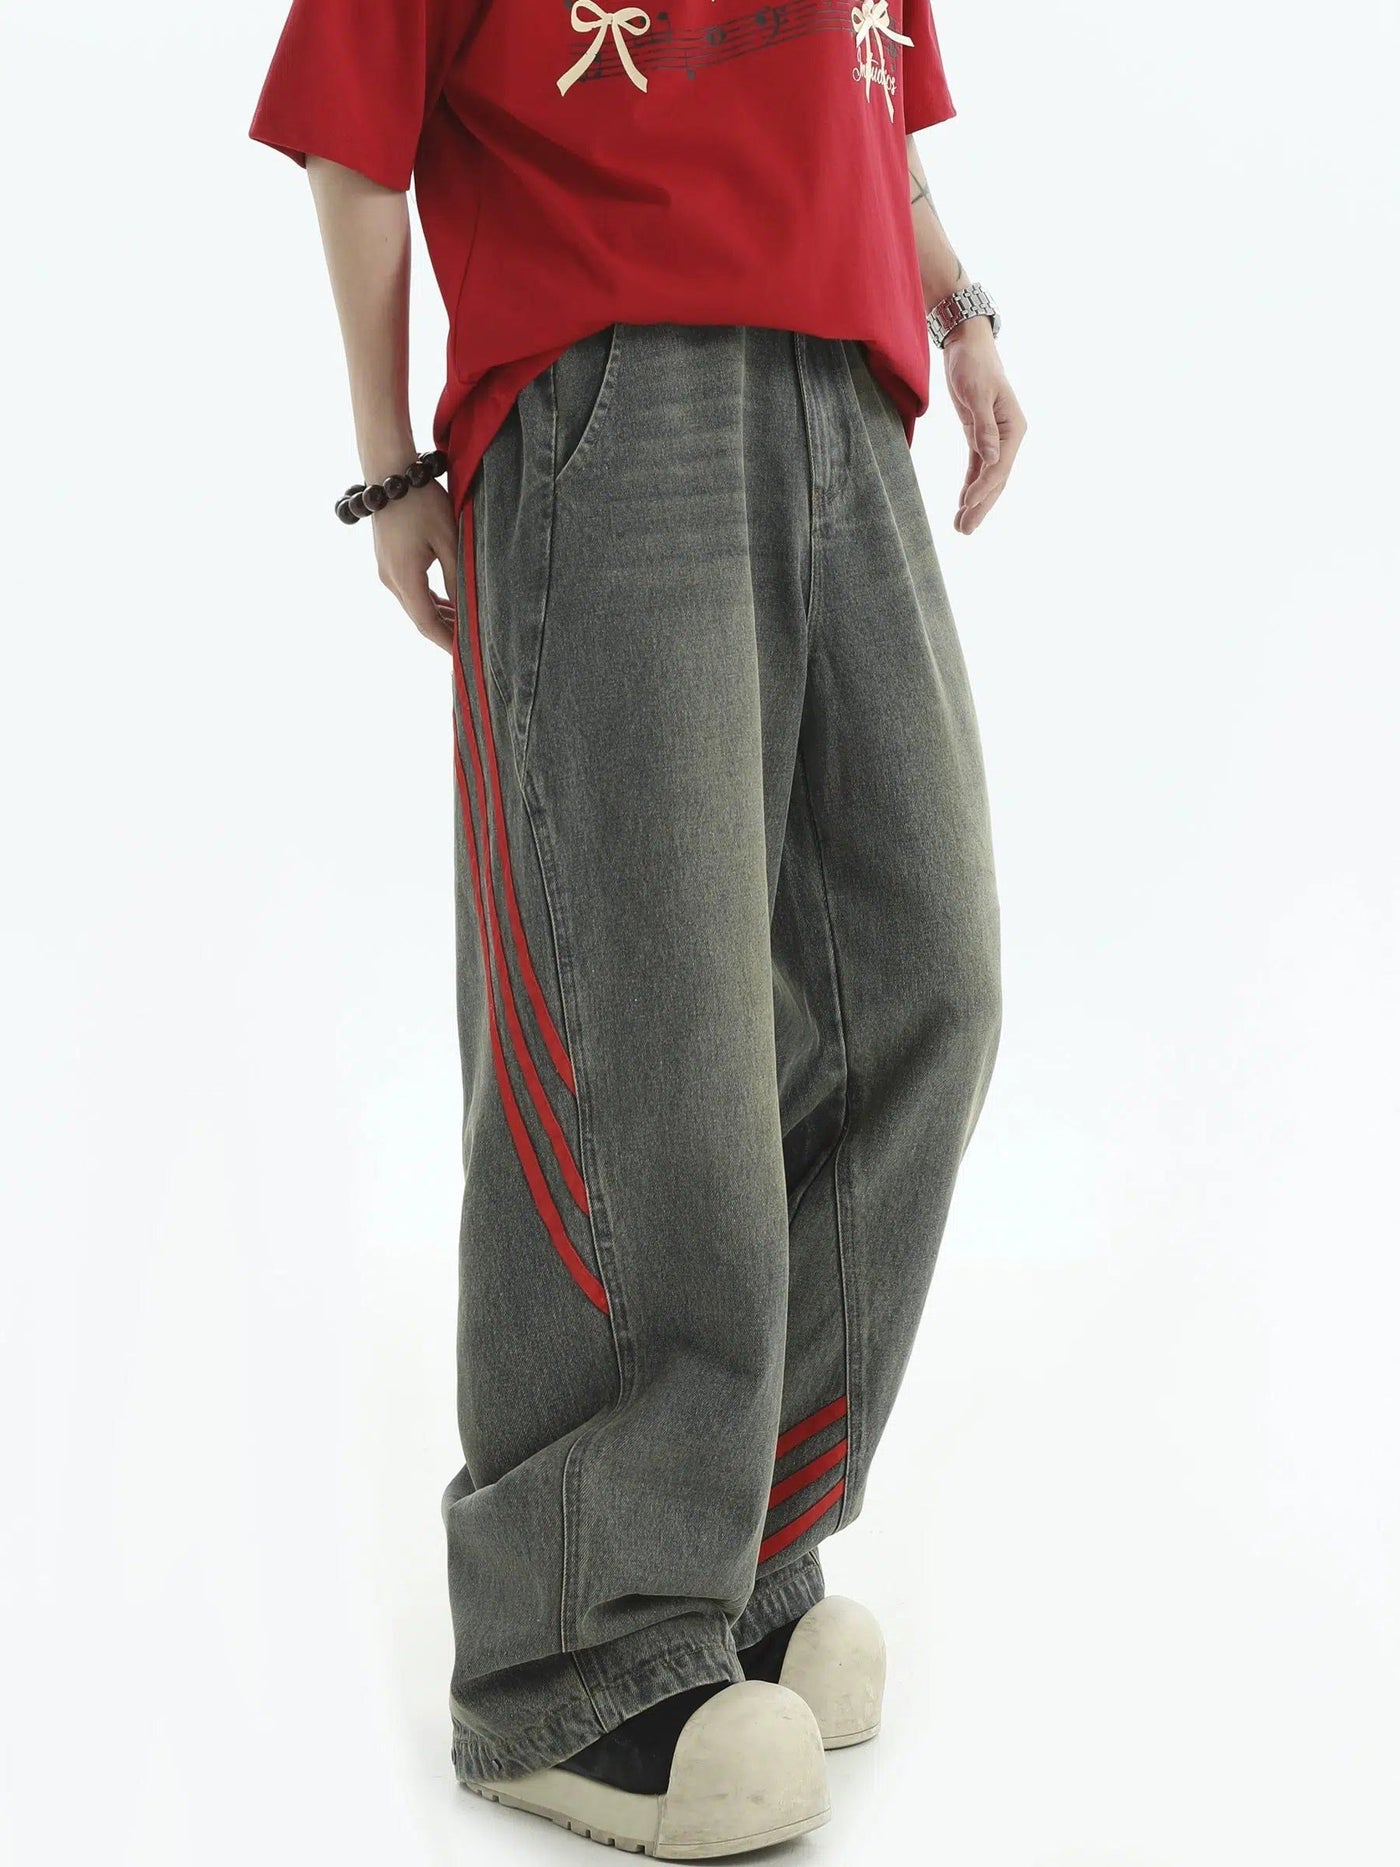 Red Lines Bootcut Jeans Korean Street Fashion Jeans By INS Korea Shop Online at OH Vault